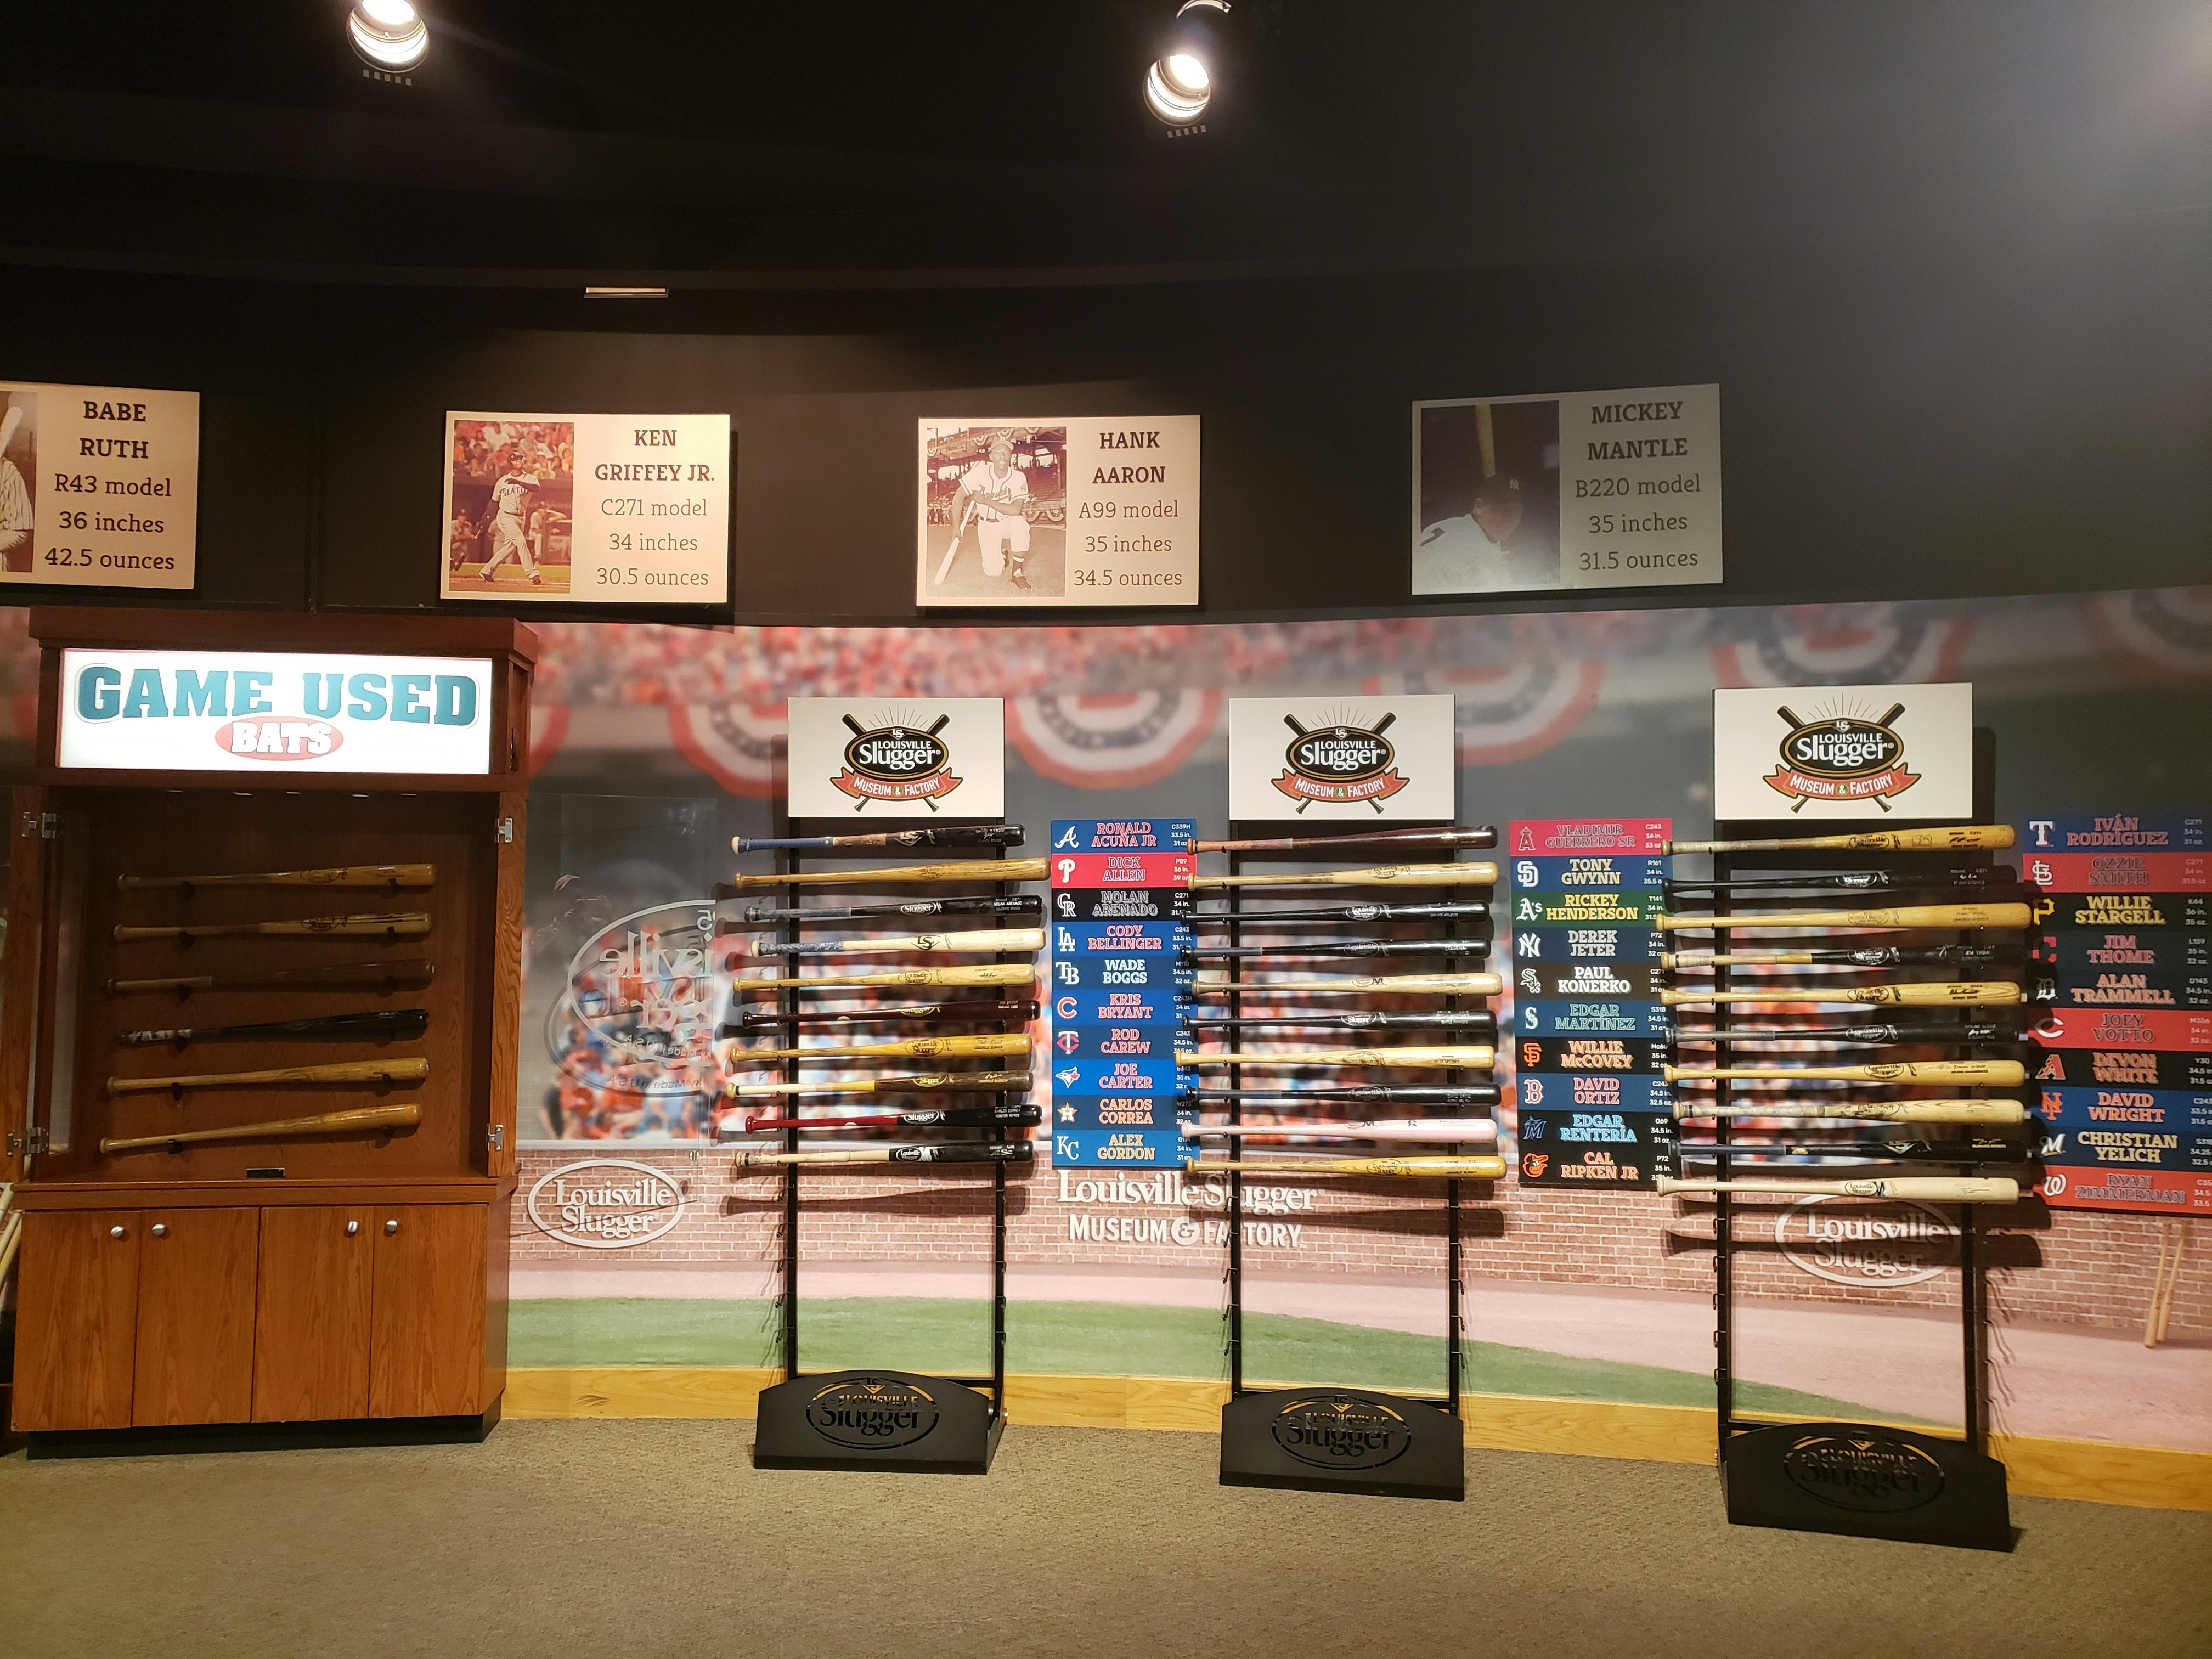 An interior shot of the Louisville Slugger Museum shows an exhibit of several bats used in baseball games by famous players. The bats are held on a special rack with the players' names next to each one. Overhead, signs show statistics for the size and weight of bats used by Babe Ruth, Hank Aaron, and other greats. Behind the bats, a large photographic wall mural simulates the crowd in a baseball stadium.jpg